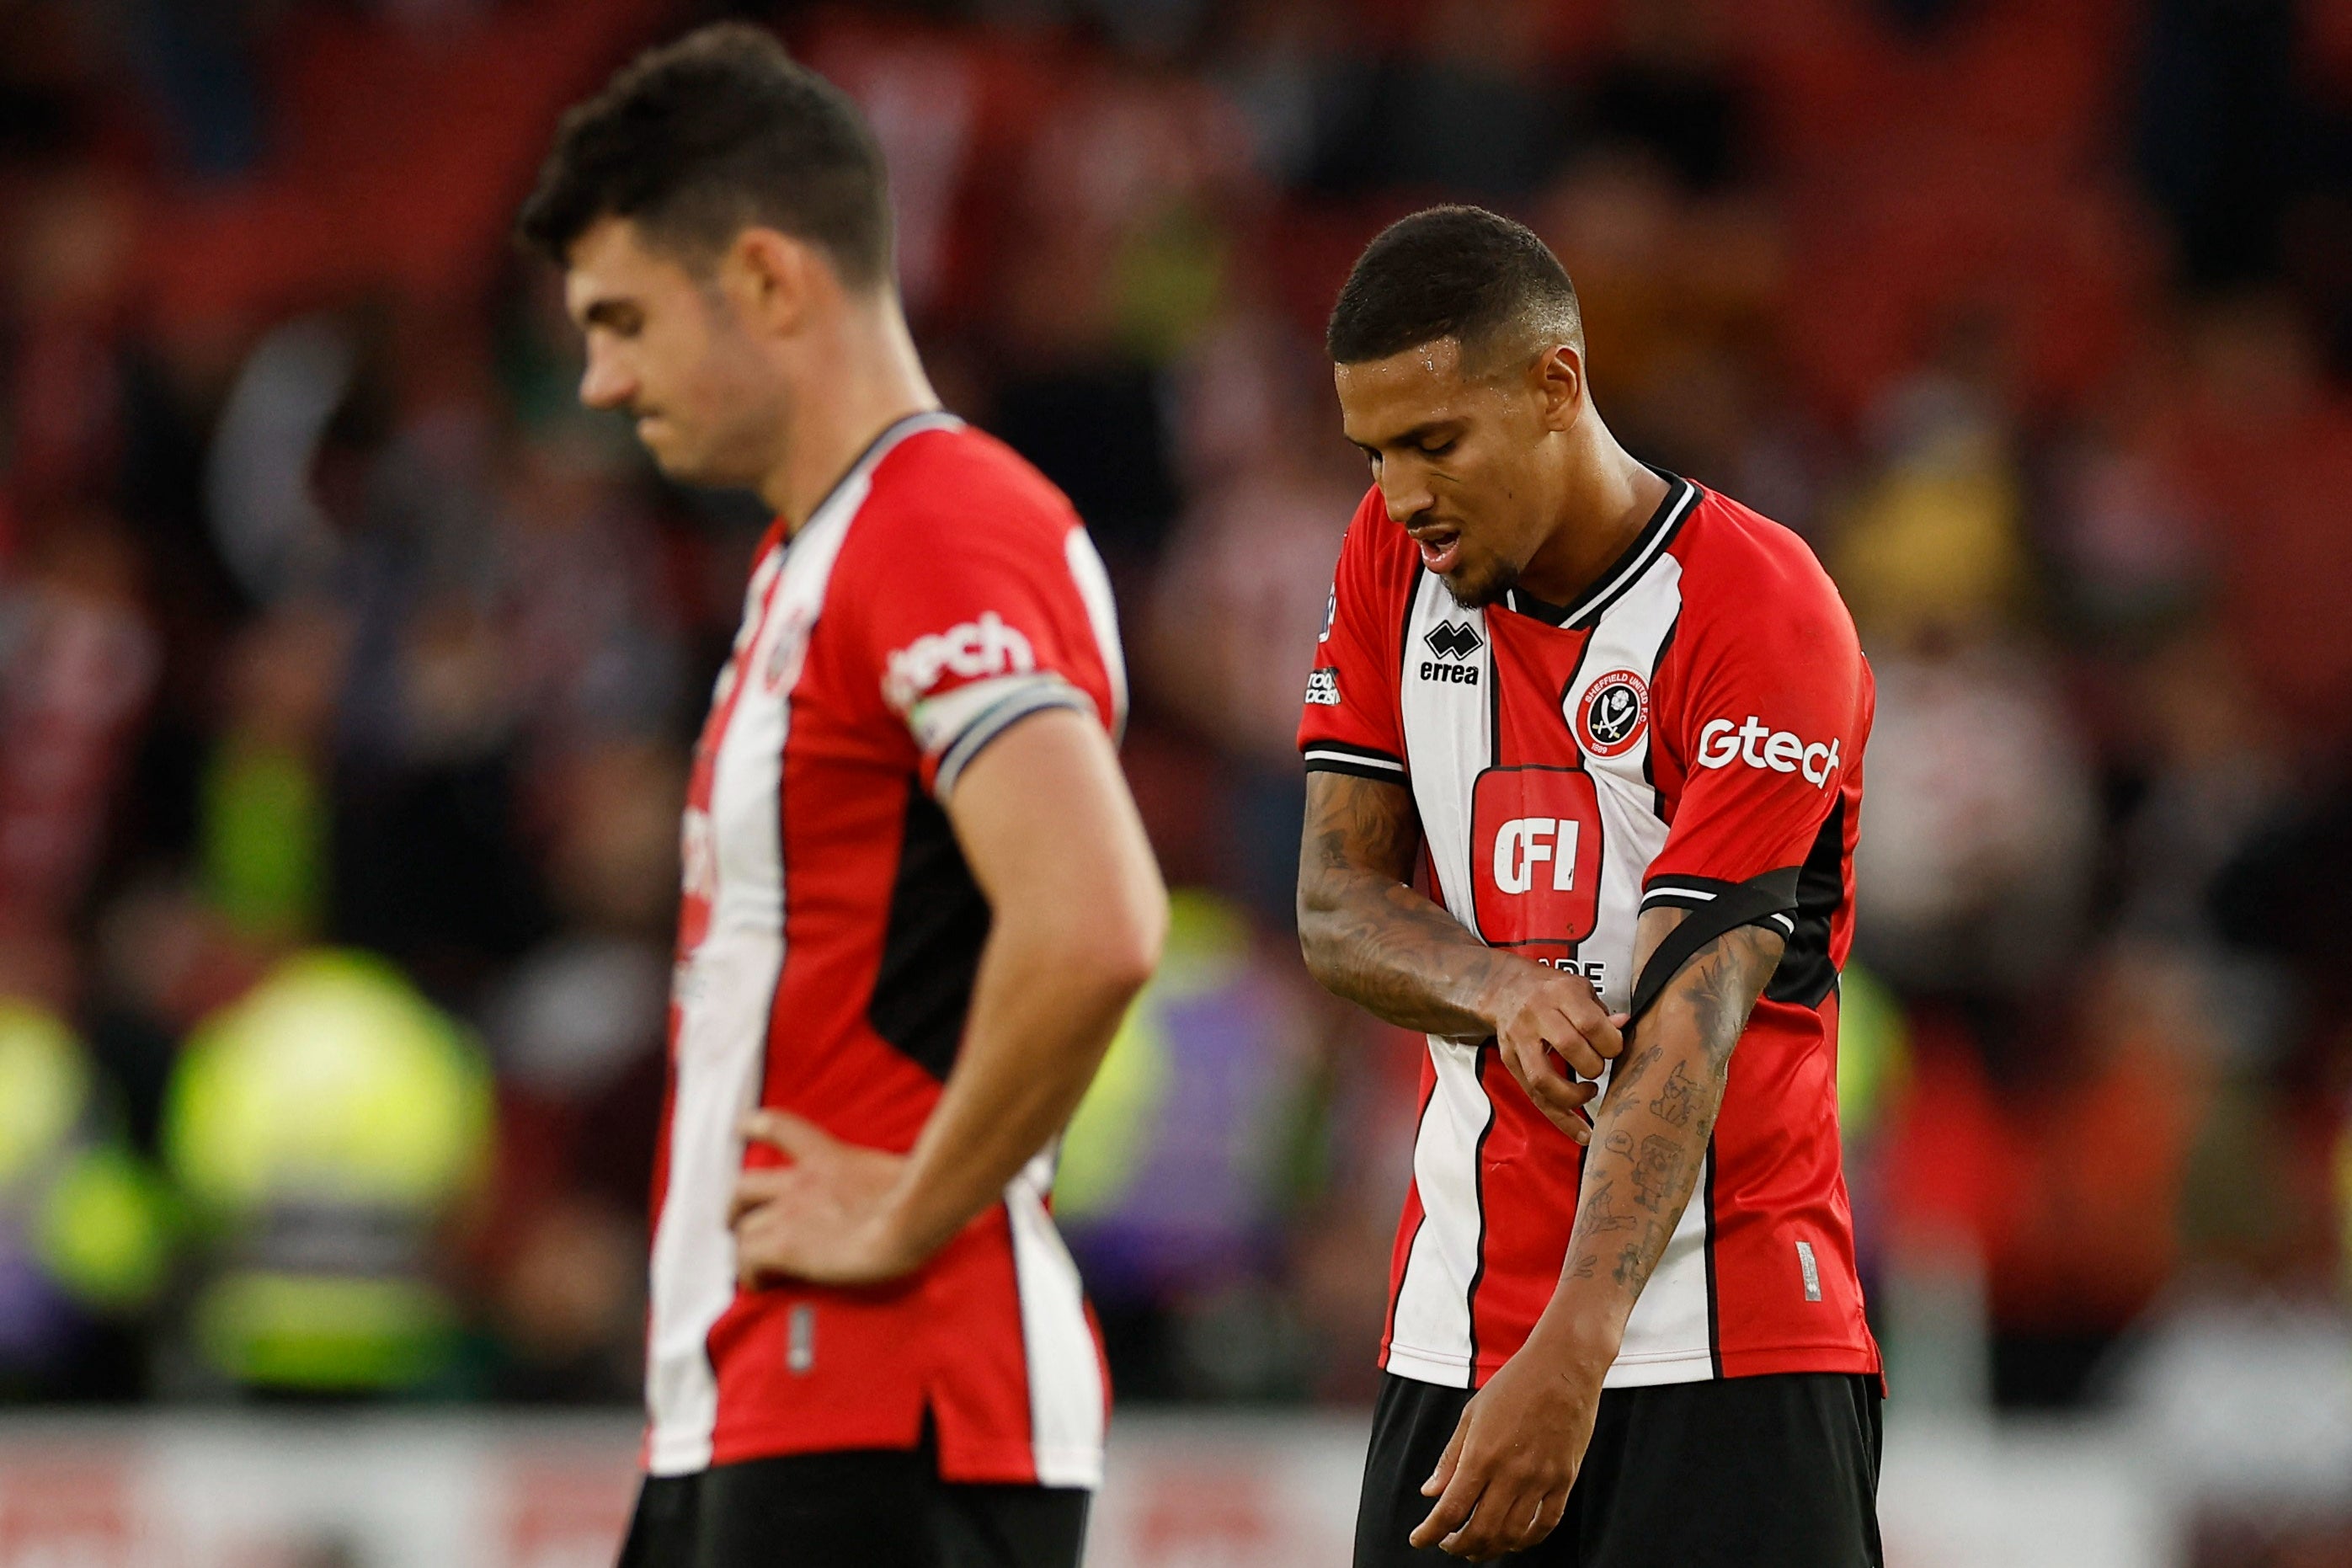 Sheffield United’s 8-0 loss to Newcastle epitomised the early struggles of the promoted clubs